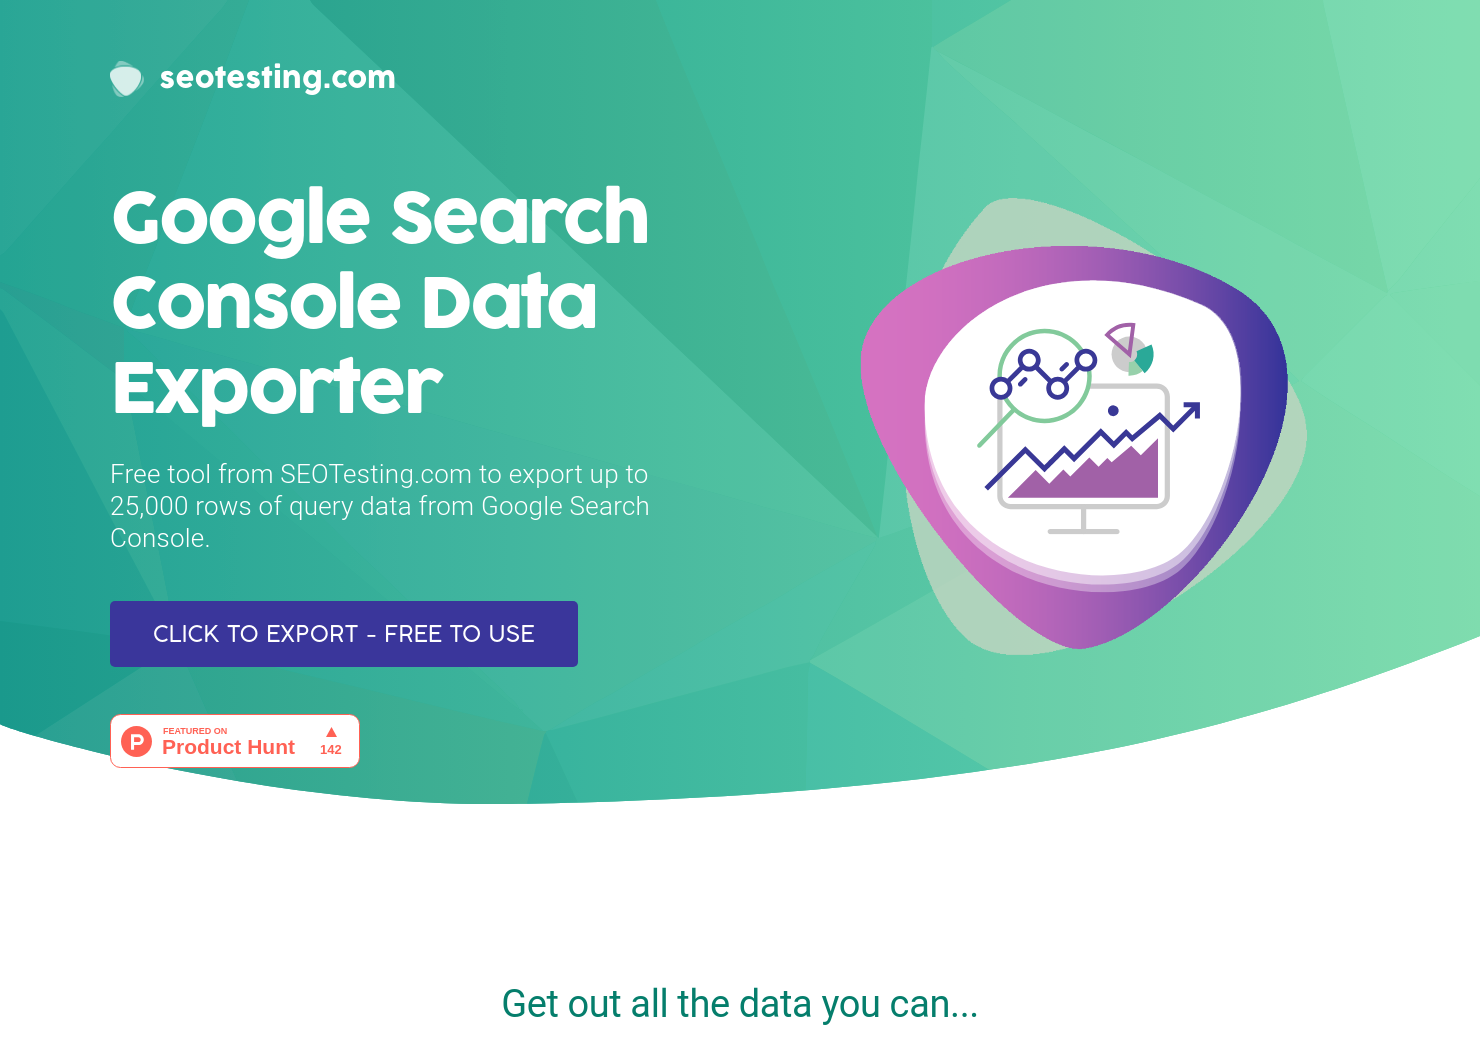 Search Console Data Exporter